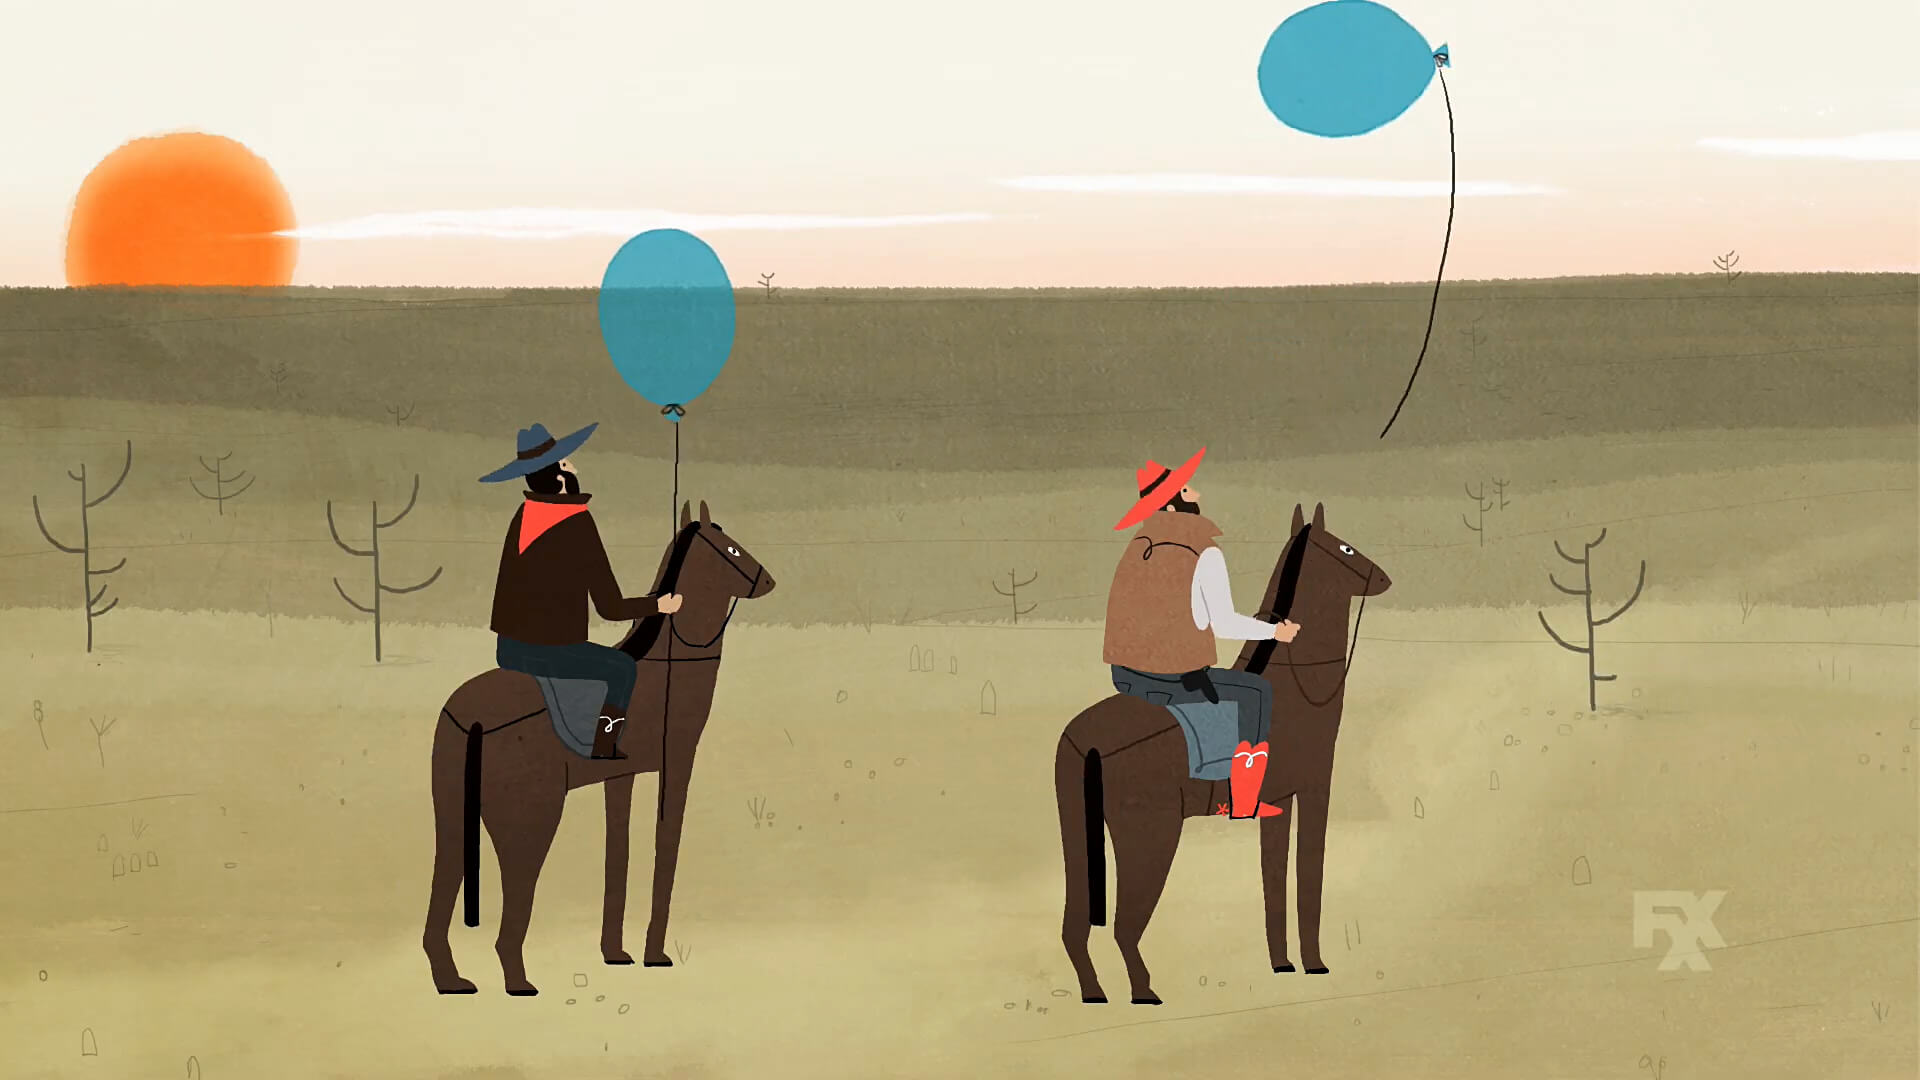 Two cowboys with balloons against a setting sun on FXX's Cake.